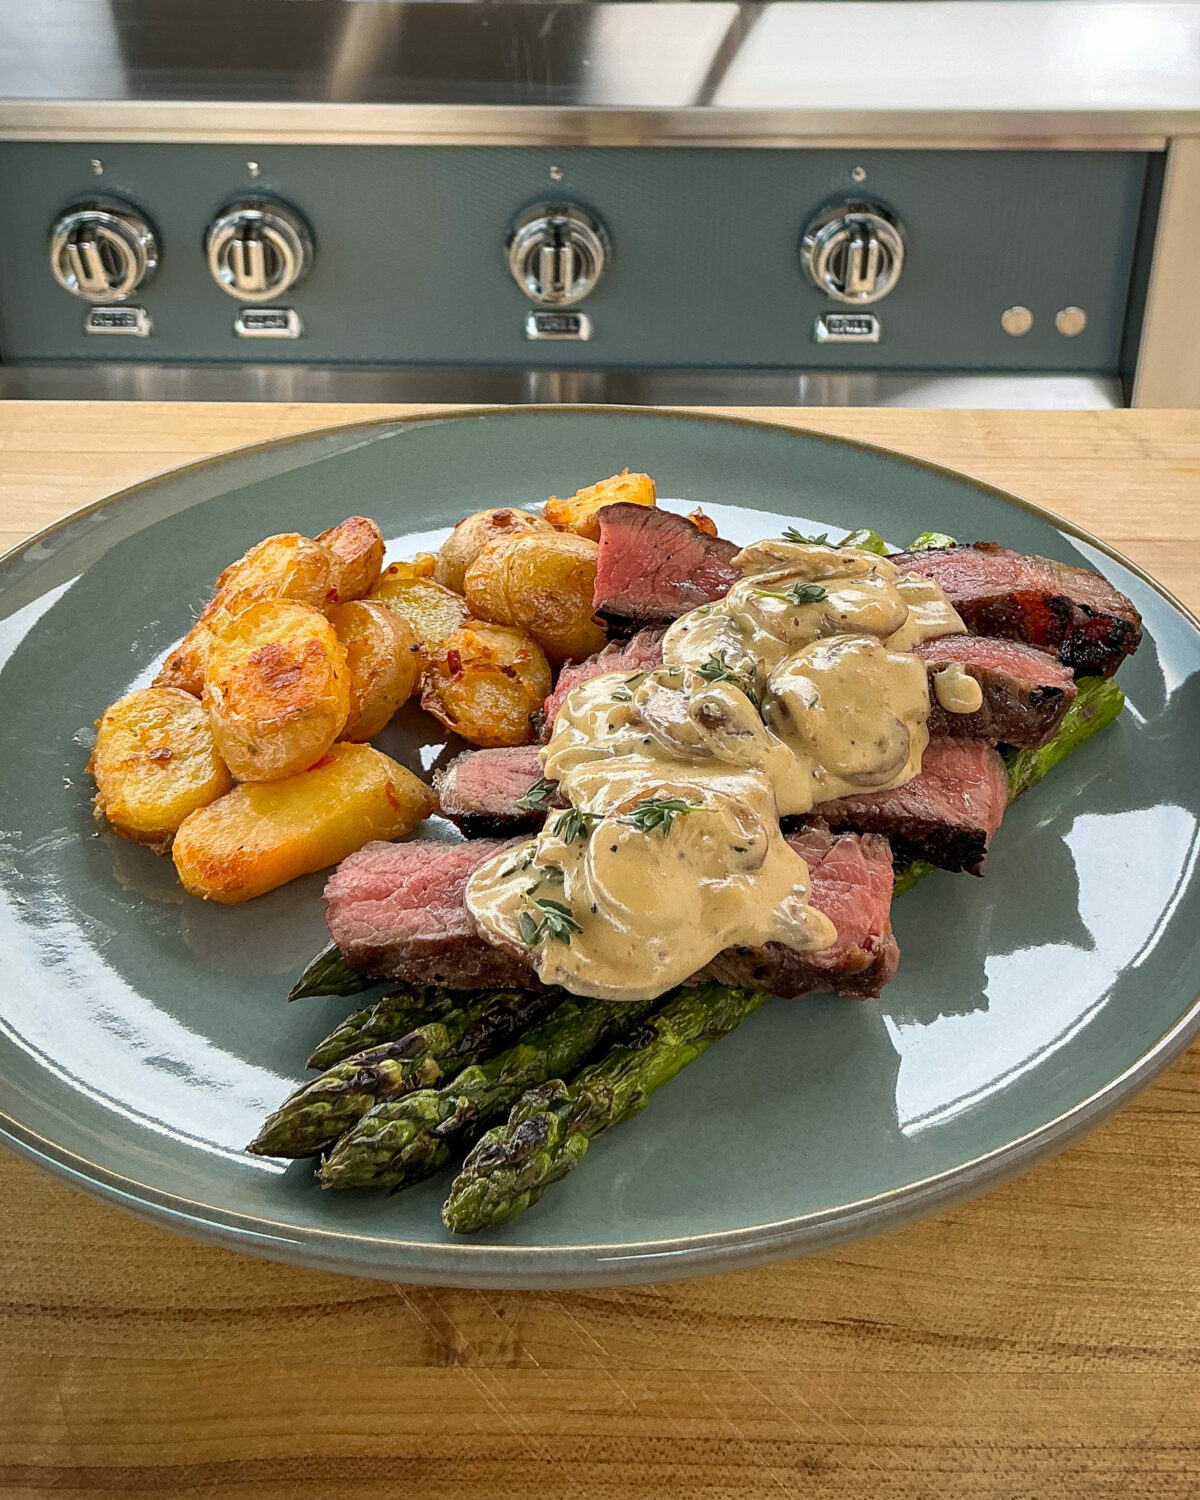 A plate with grilled steak slices overtop asparagus with a mushroom sauce and bomba potatoes.